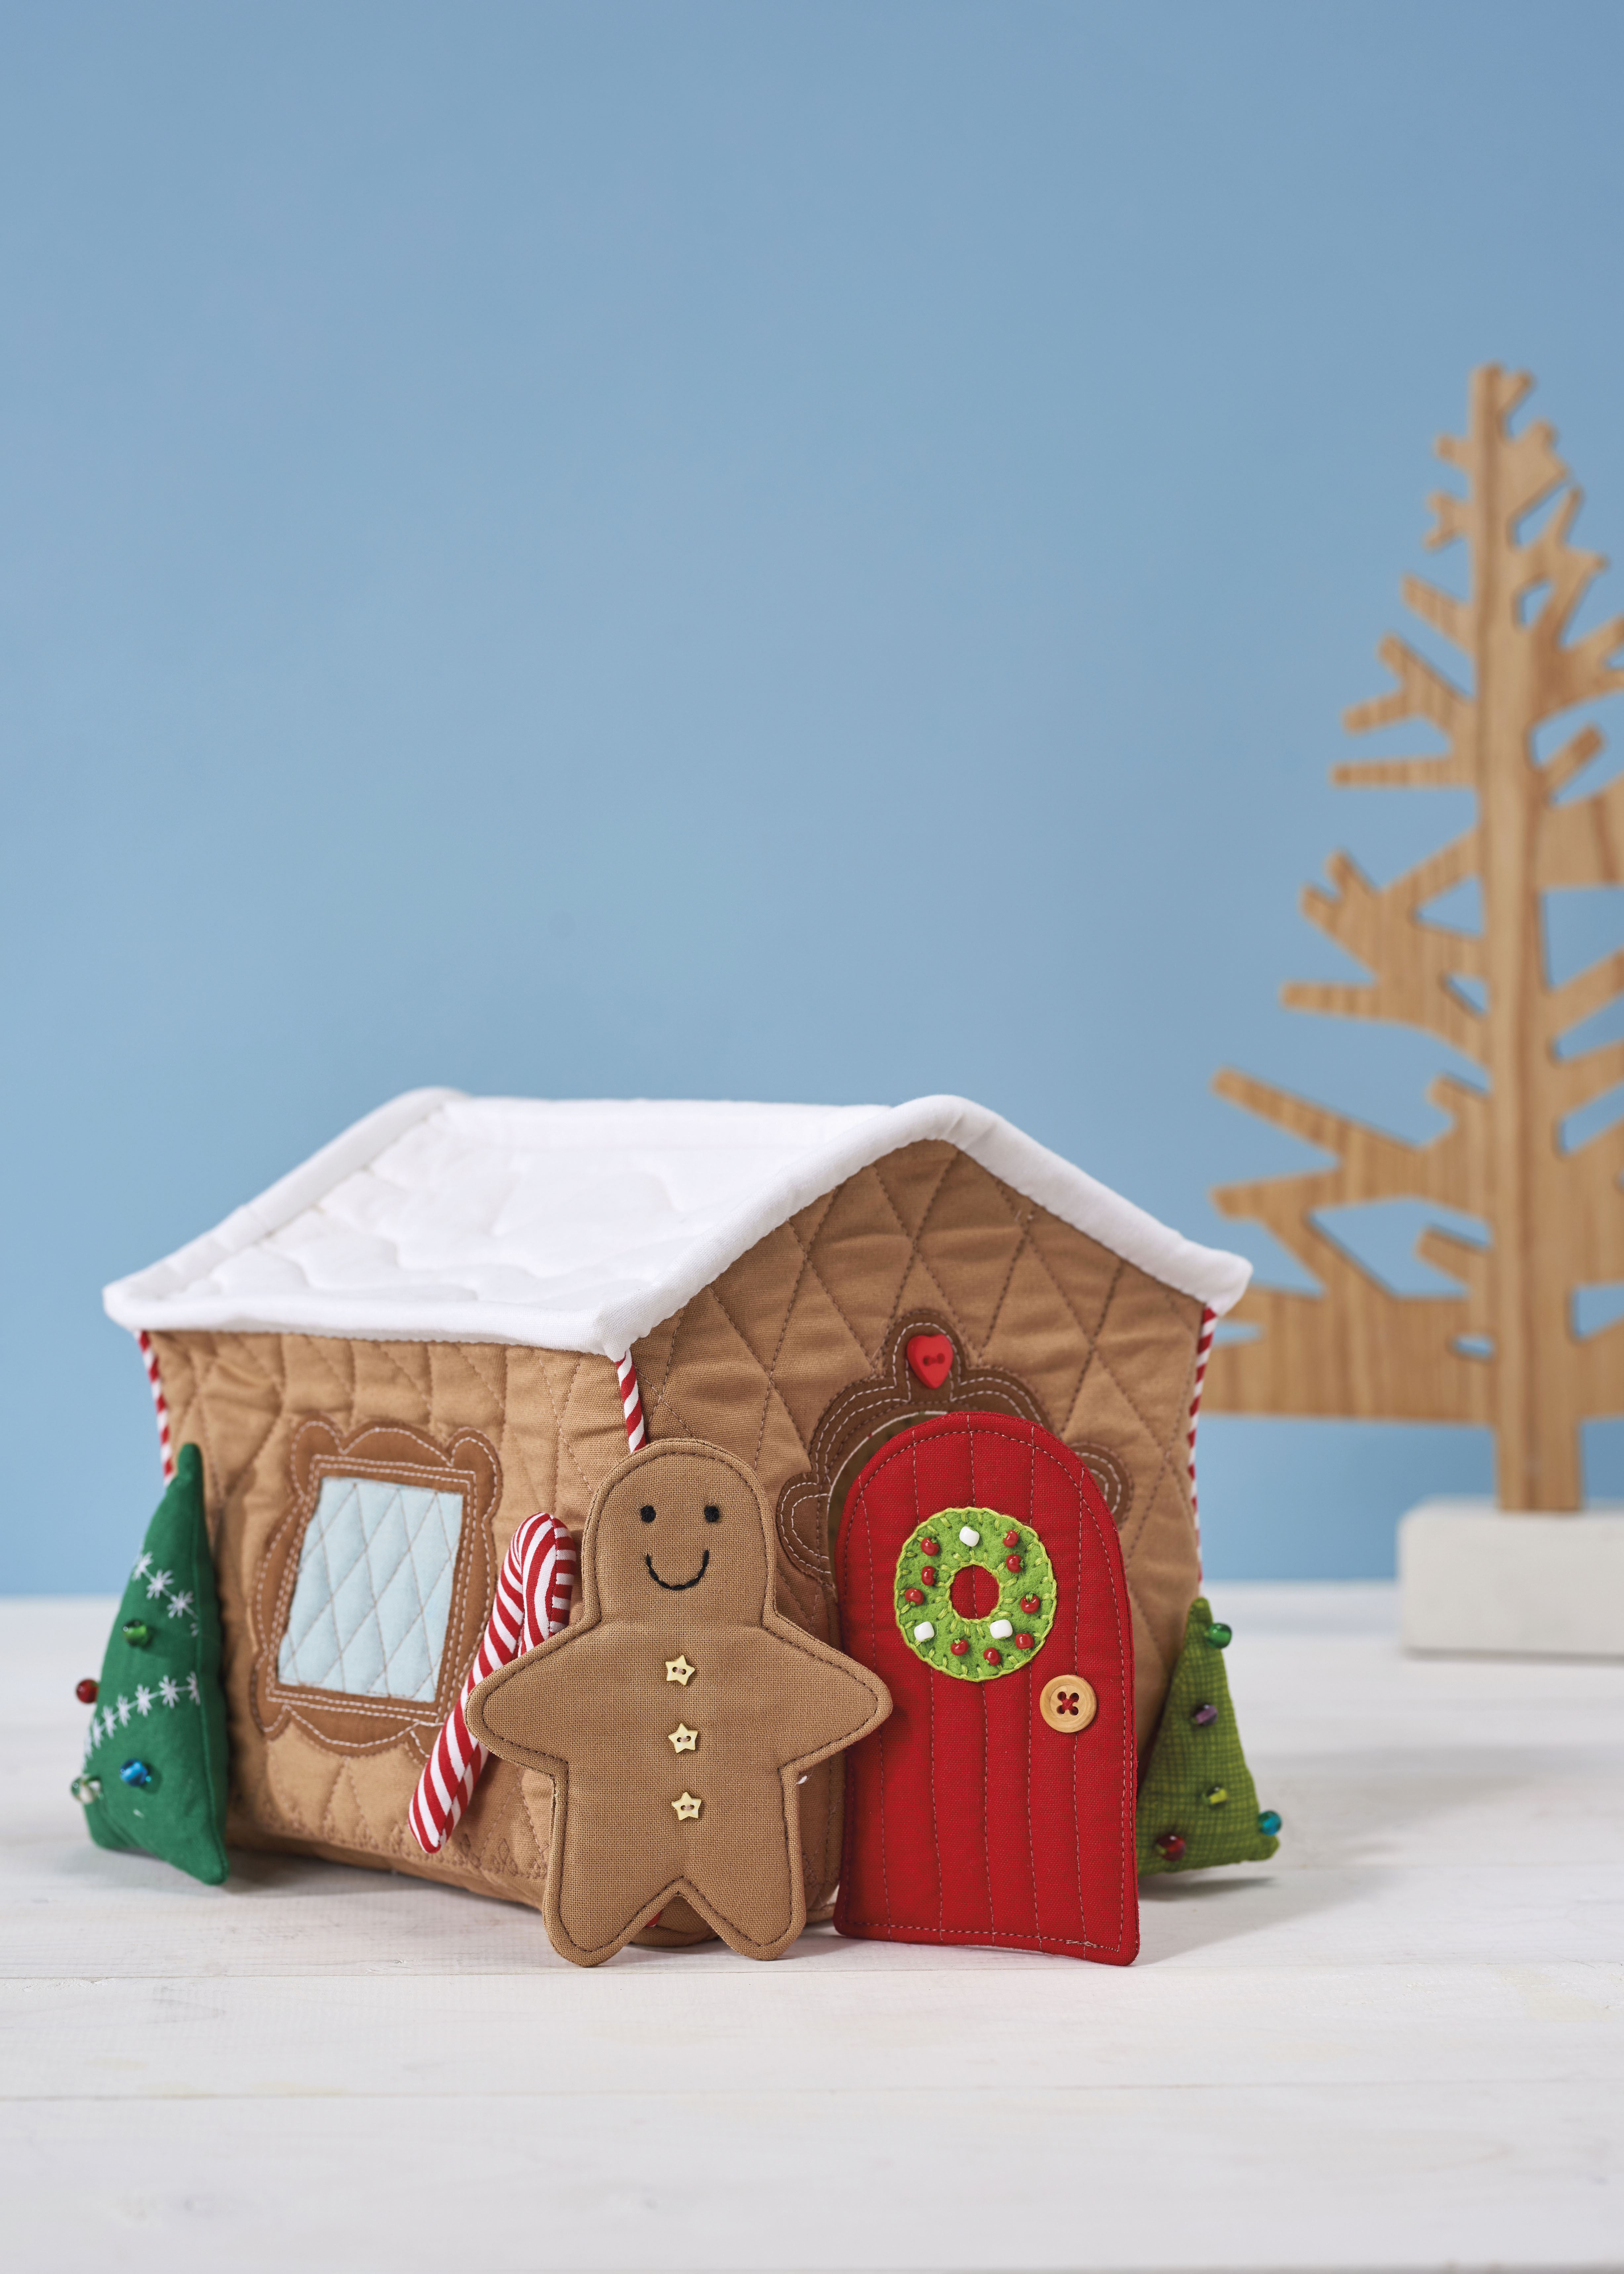 Gingerbread house pattern